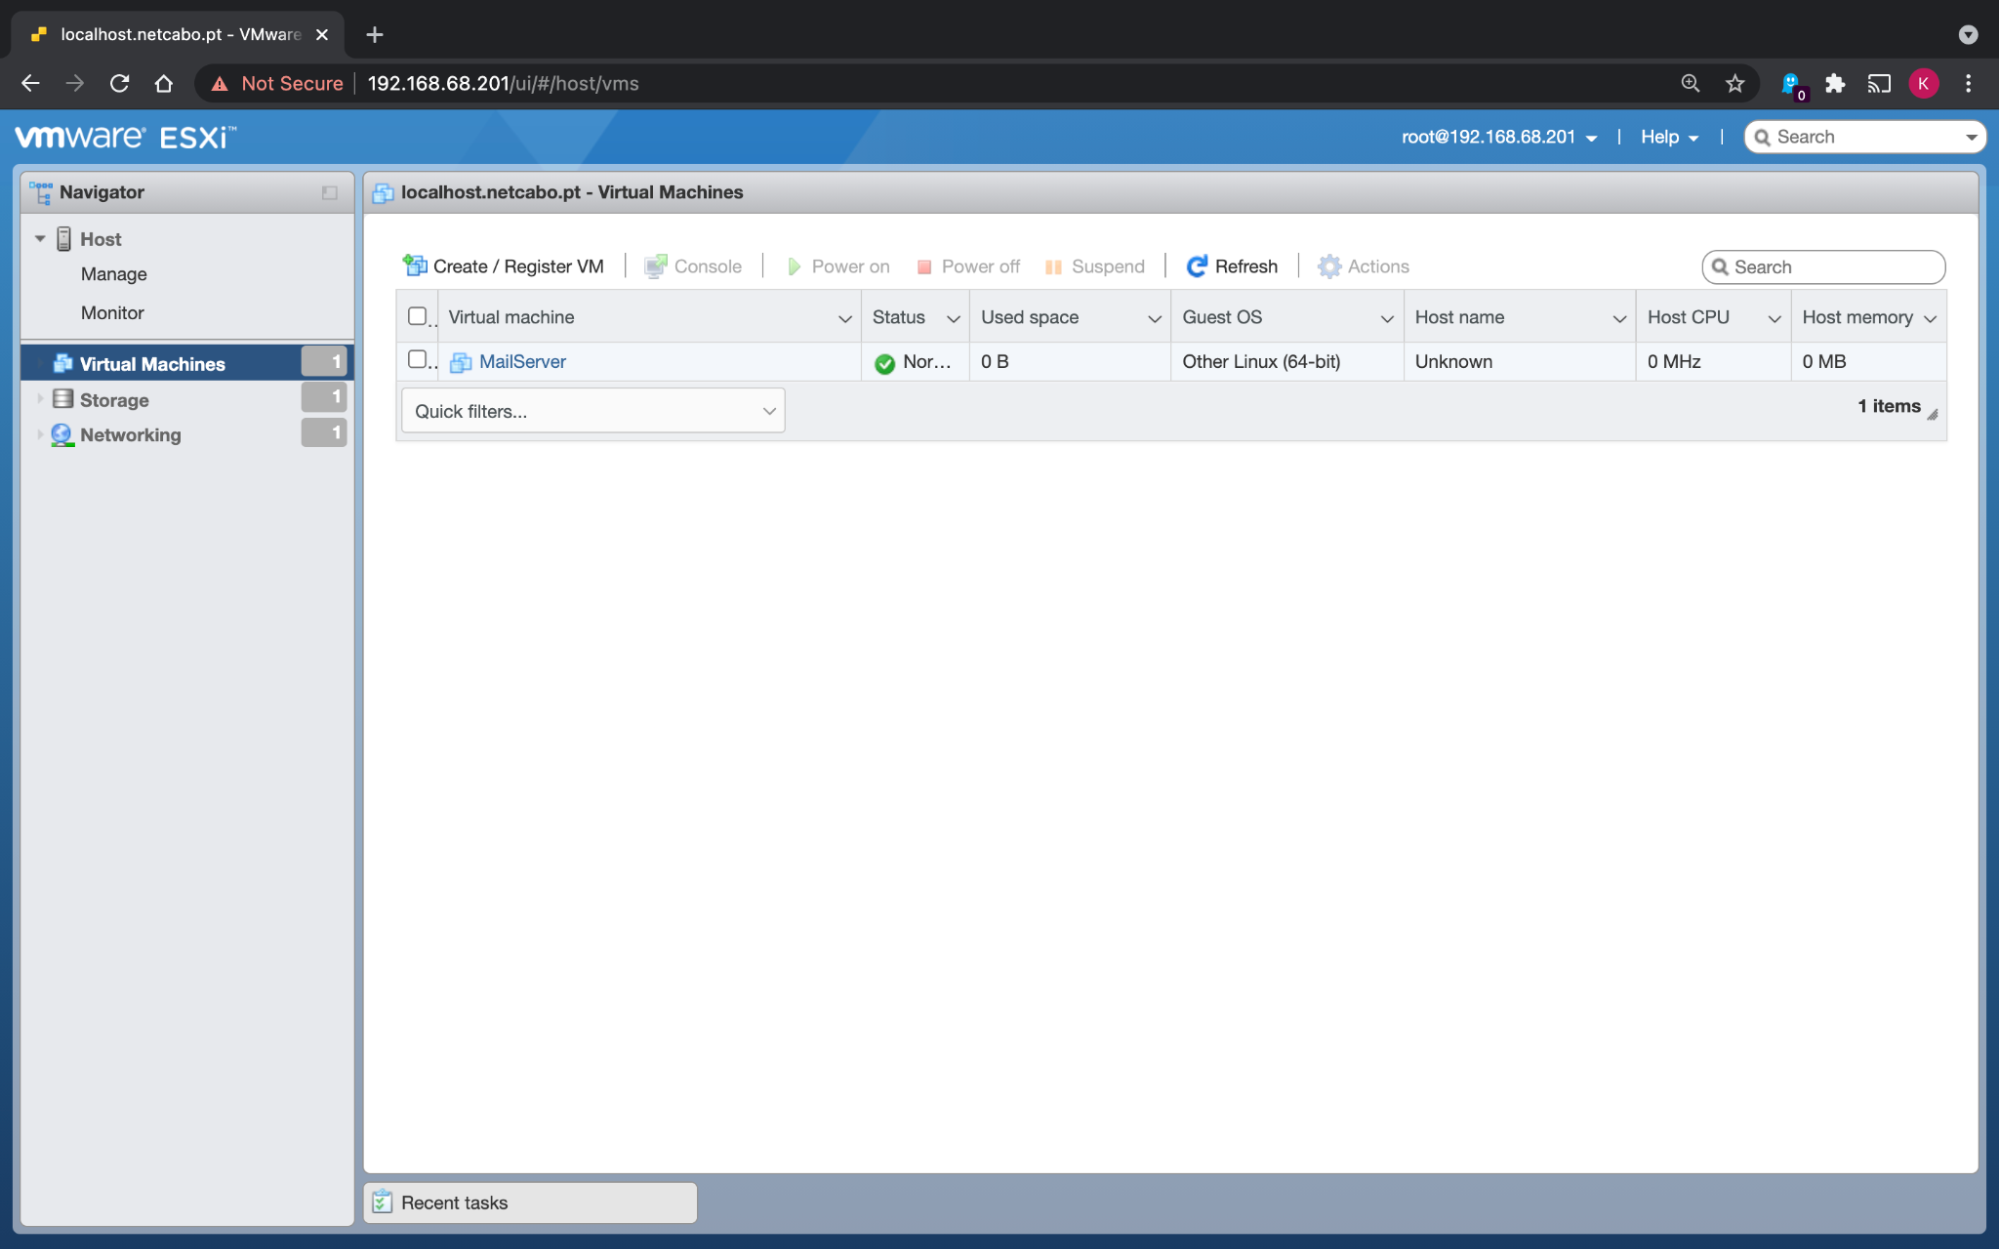 The existing VMs list now displays the VM that you have successfully created